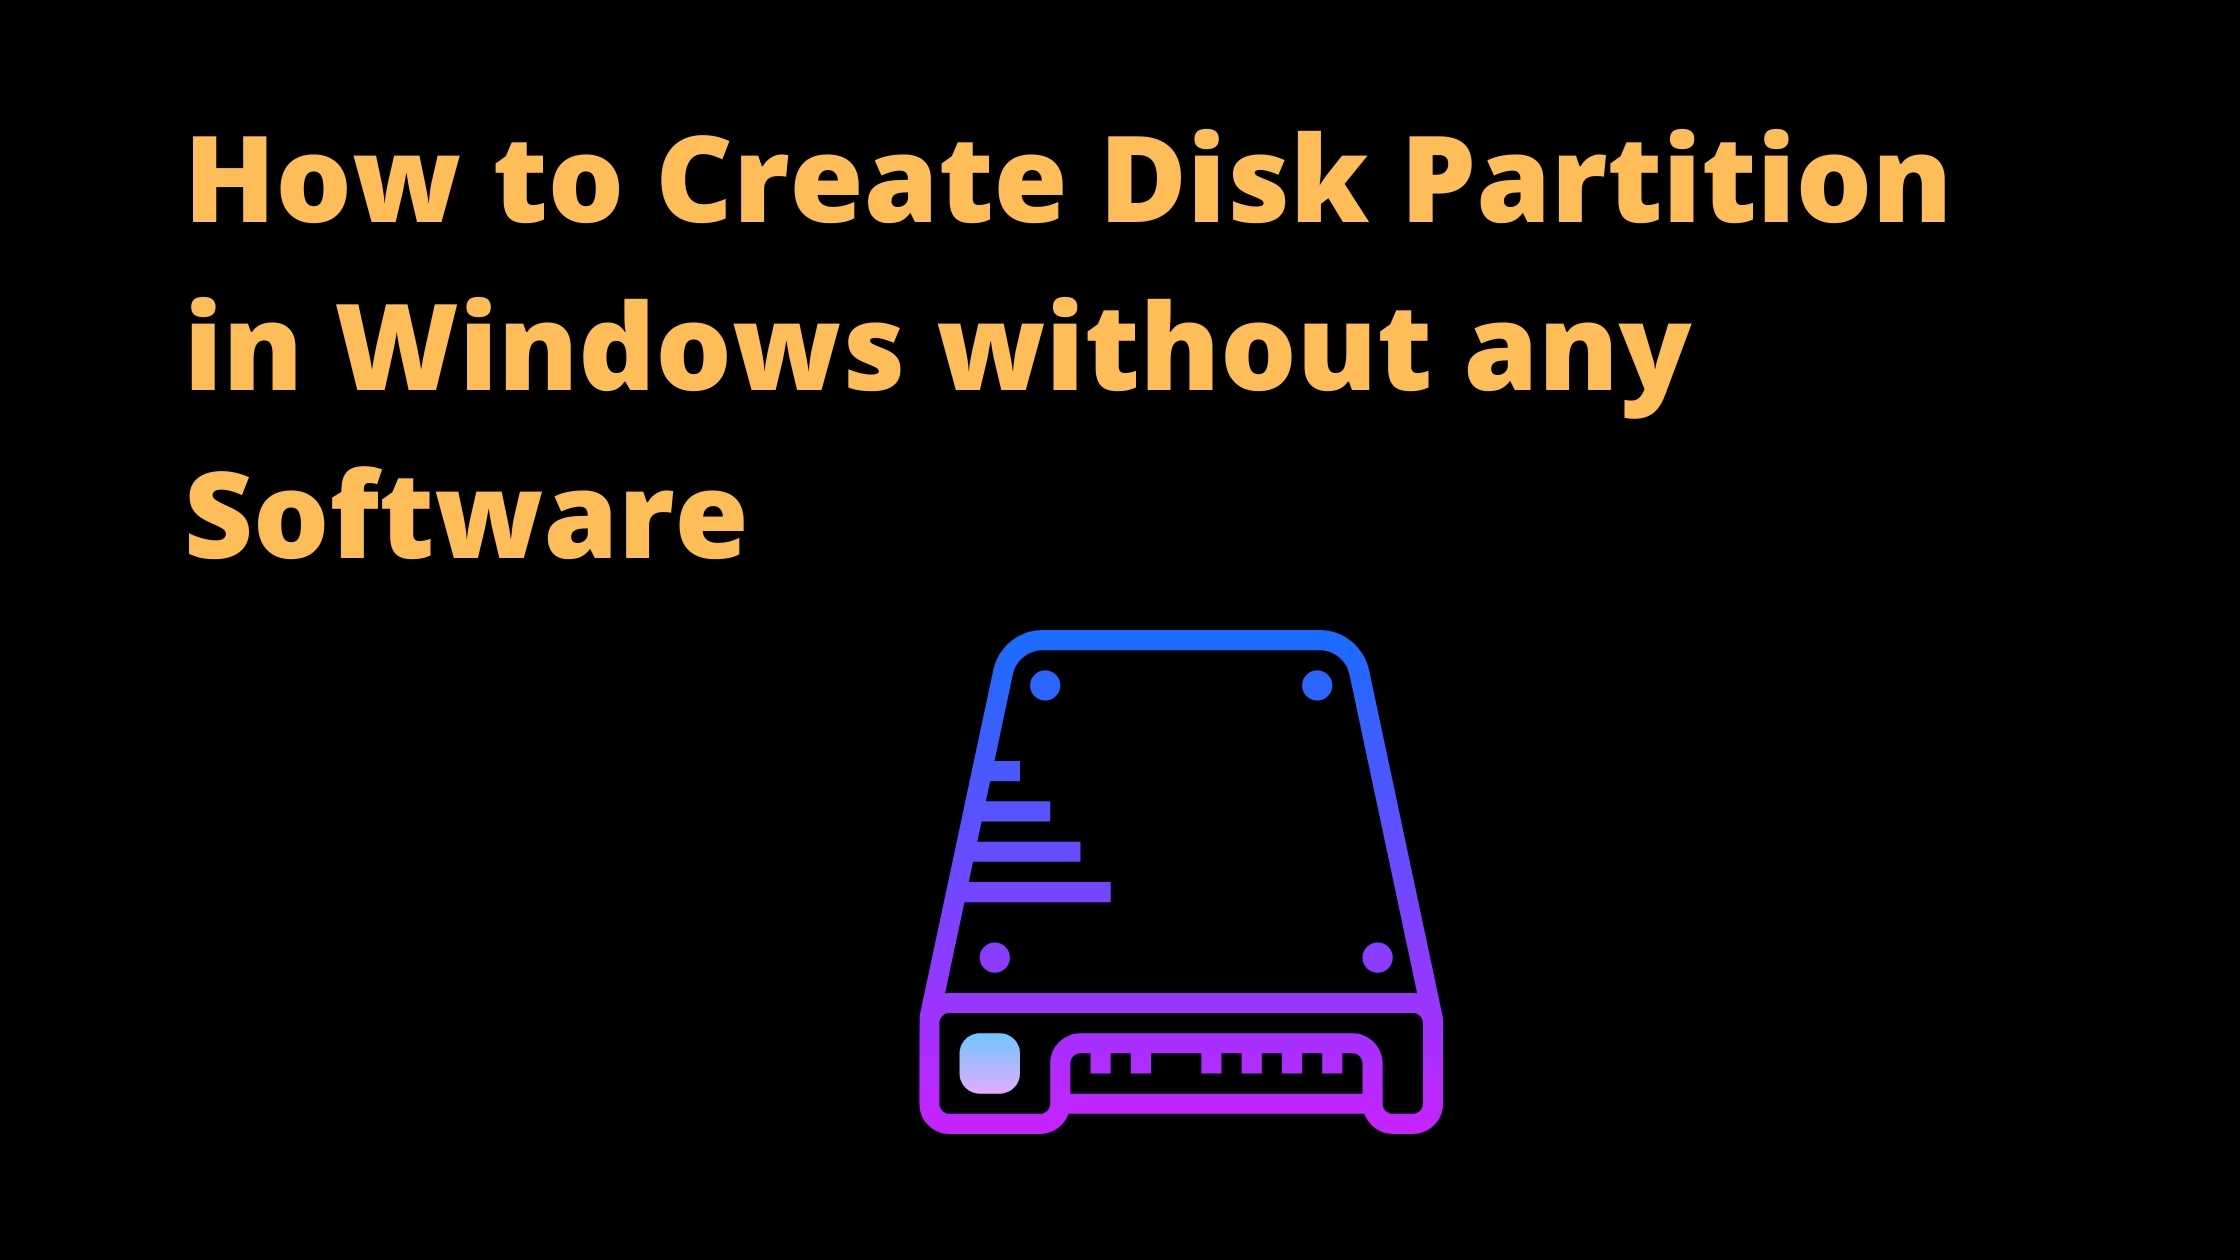 how to create disk partition without software